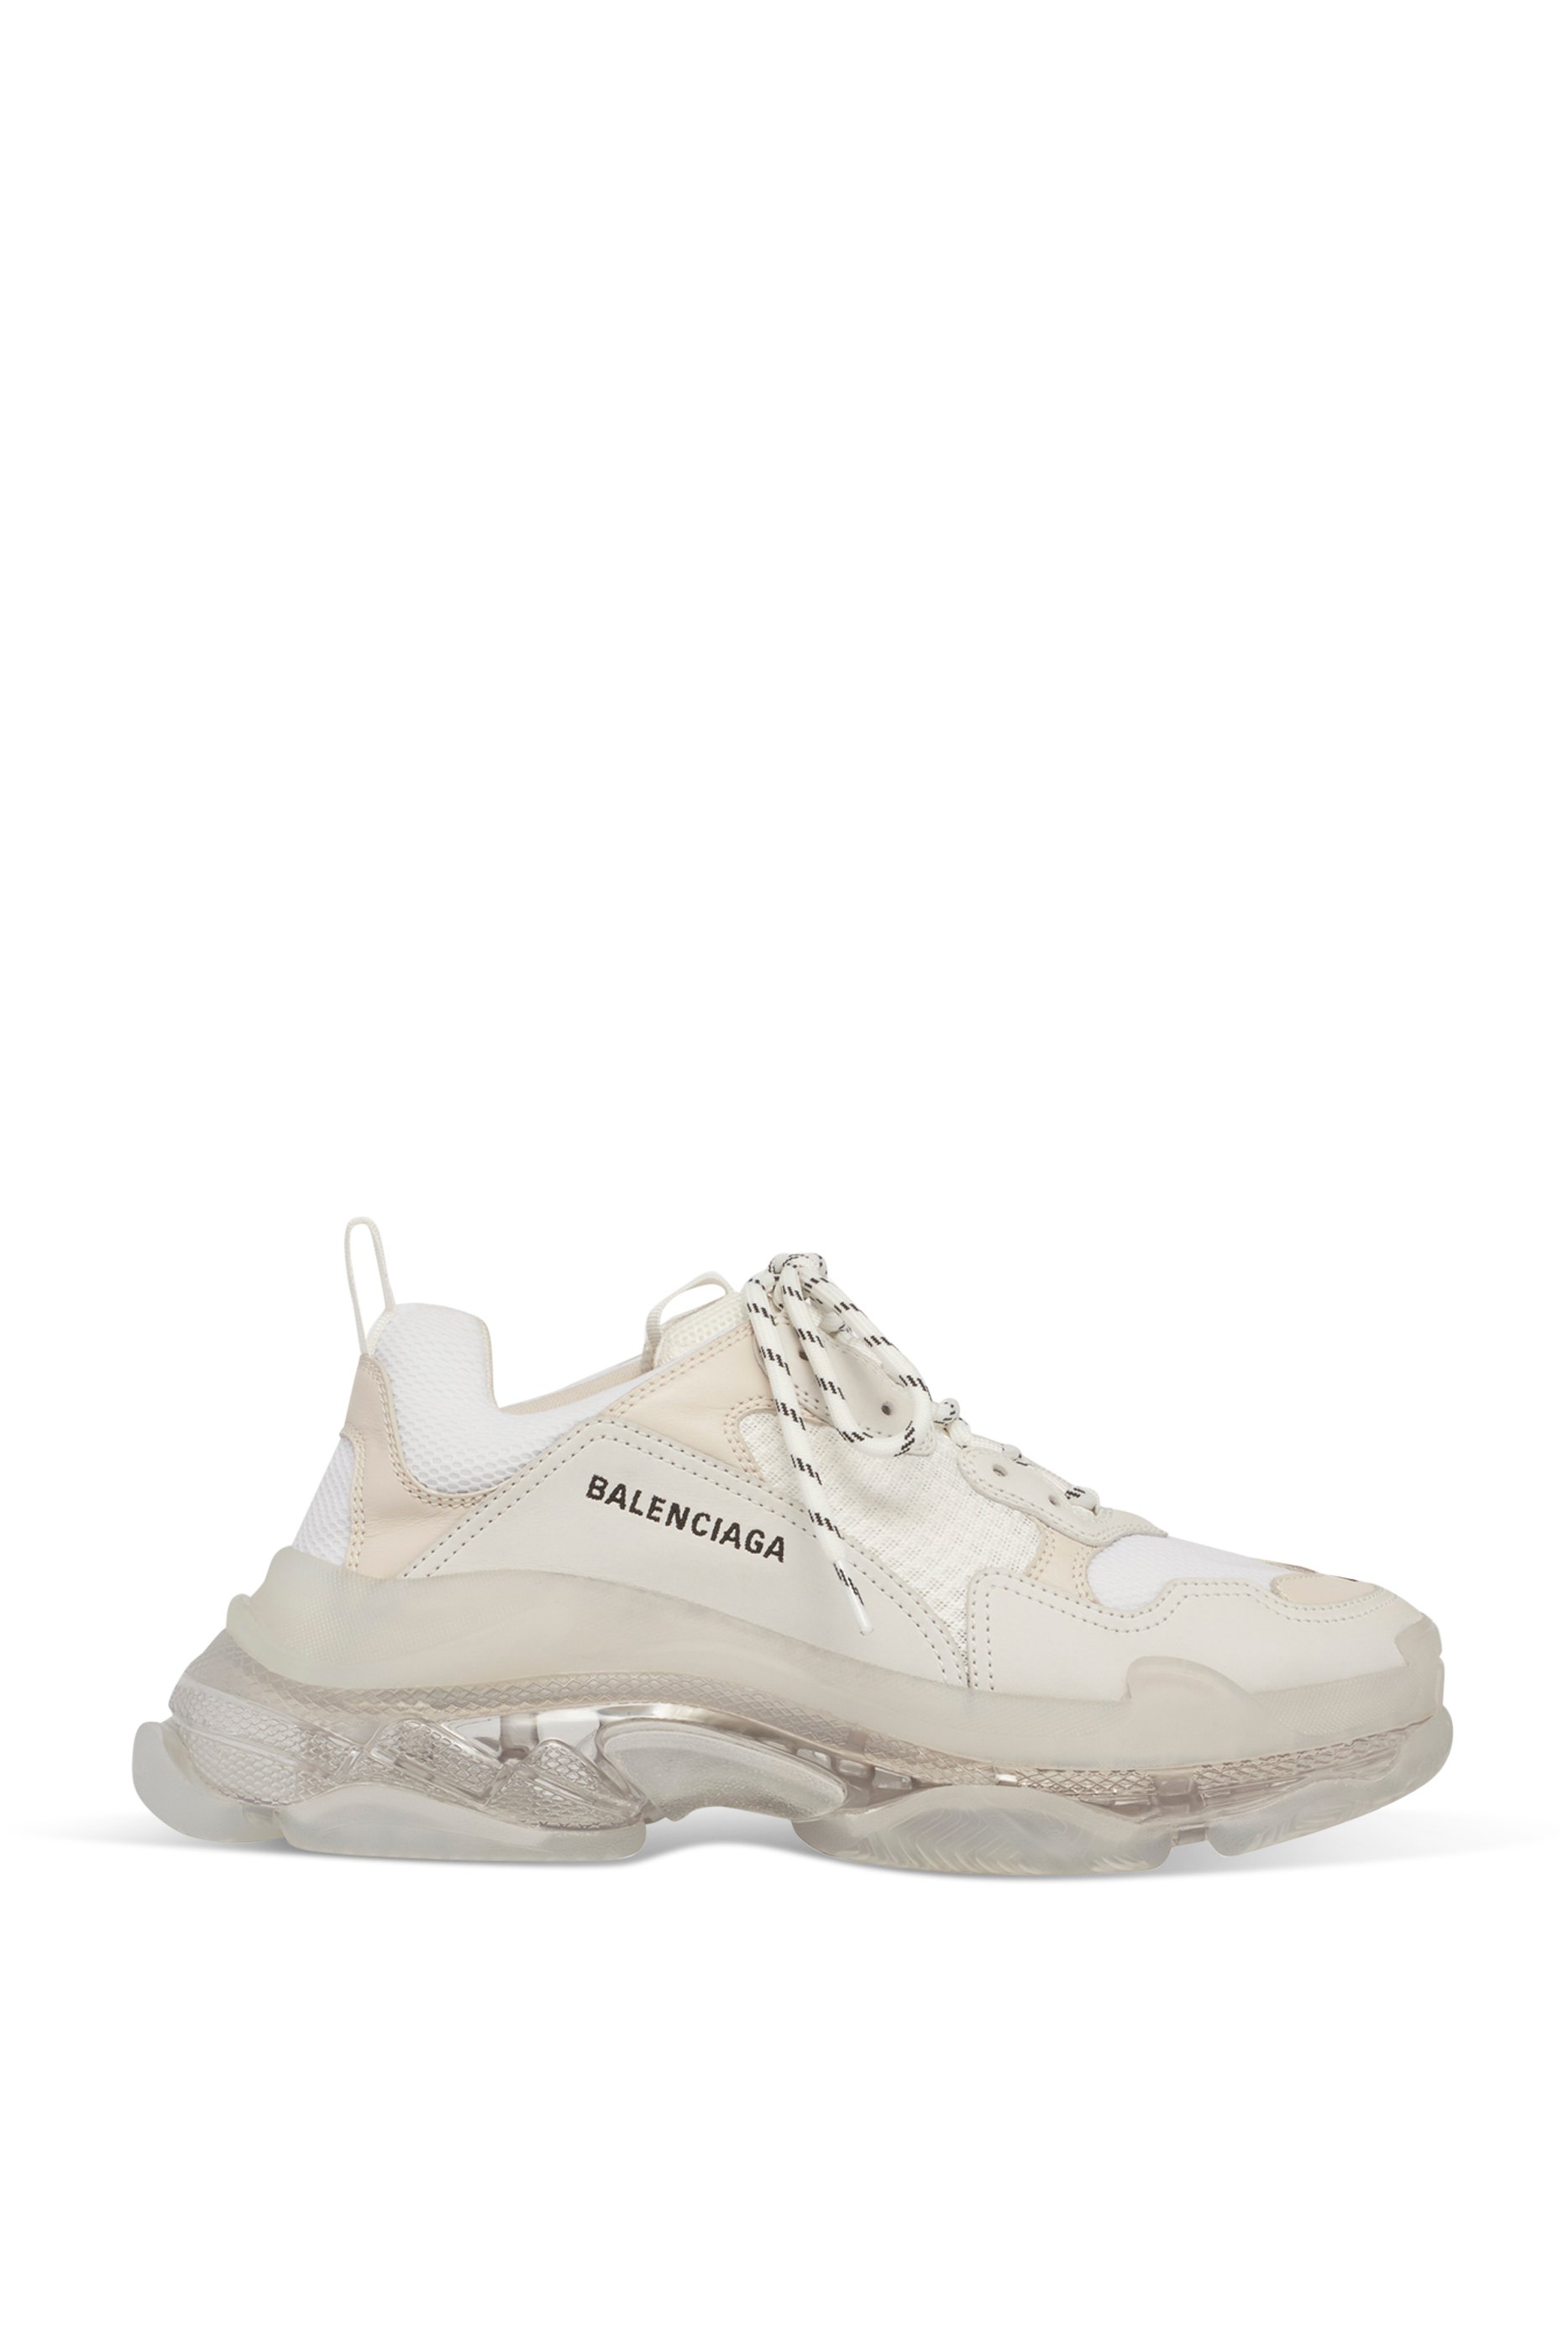 Buy Balenciaga Triple S Clear Sole Sneakers for Mens | Bloomingdale's ...